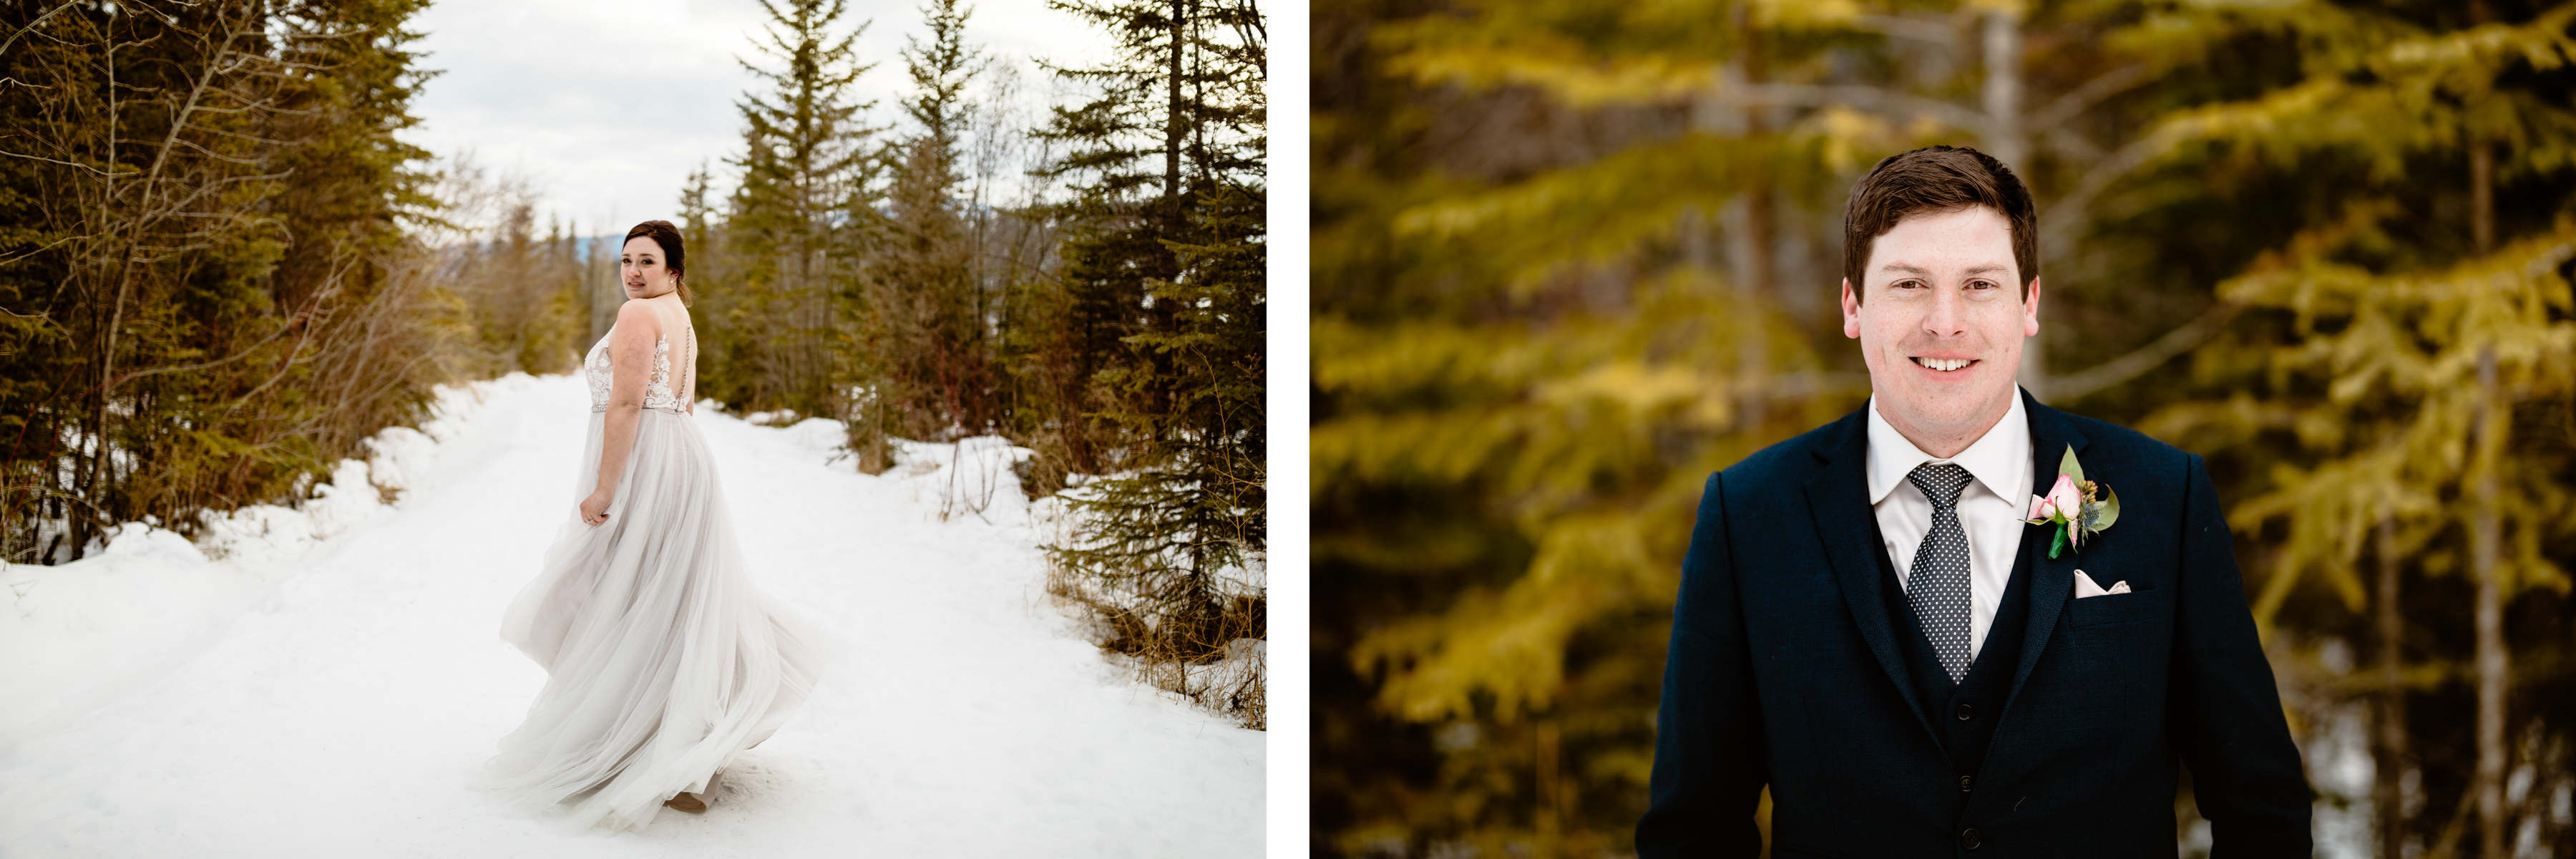 Invermere Wedding Photographers at Eagle Ranch and Panorama Ski Resort - Image 46